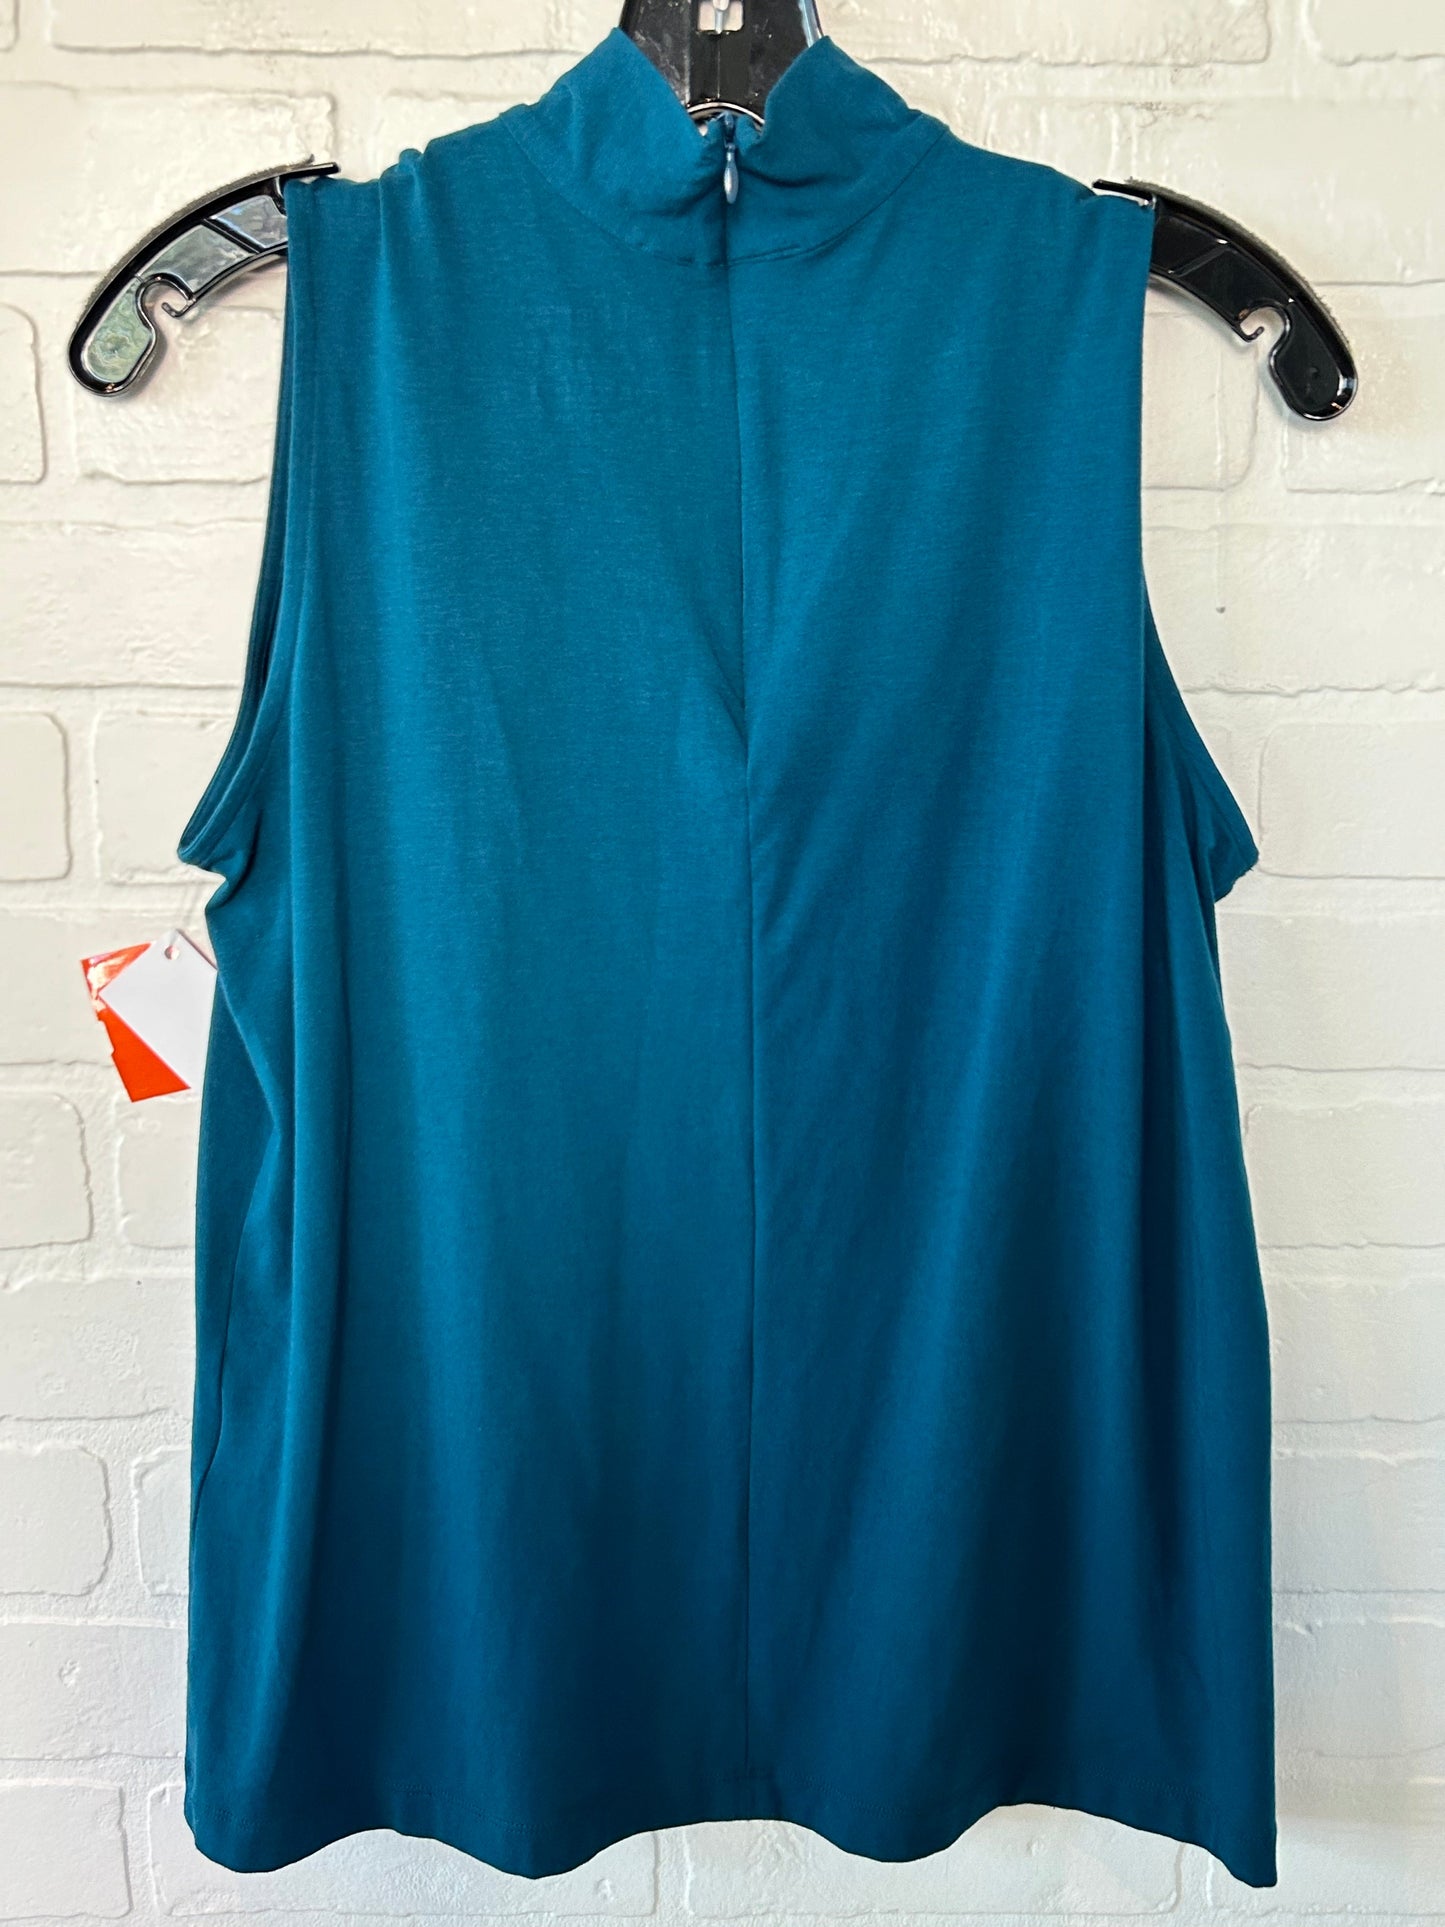 Teal Top Sleeveless Chicos, Size M